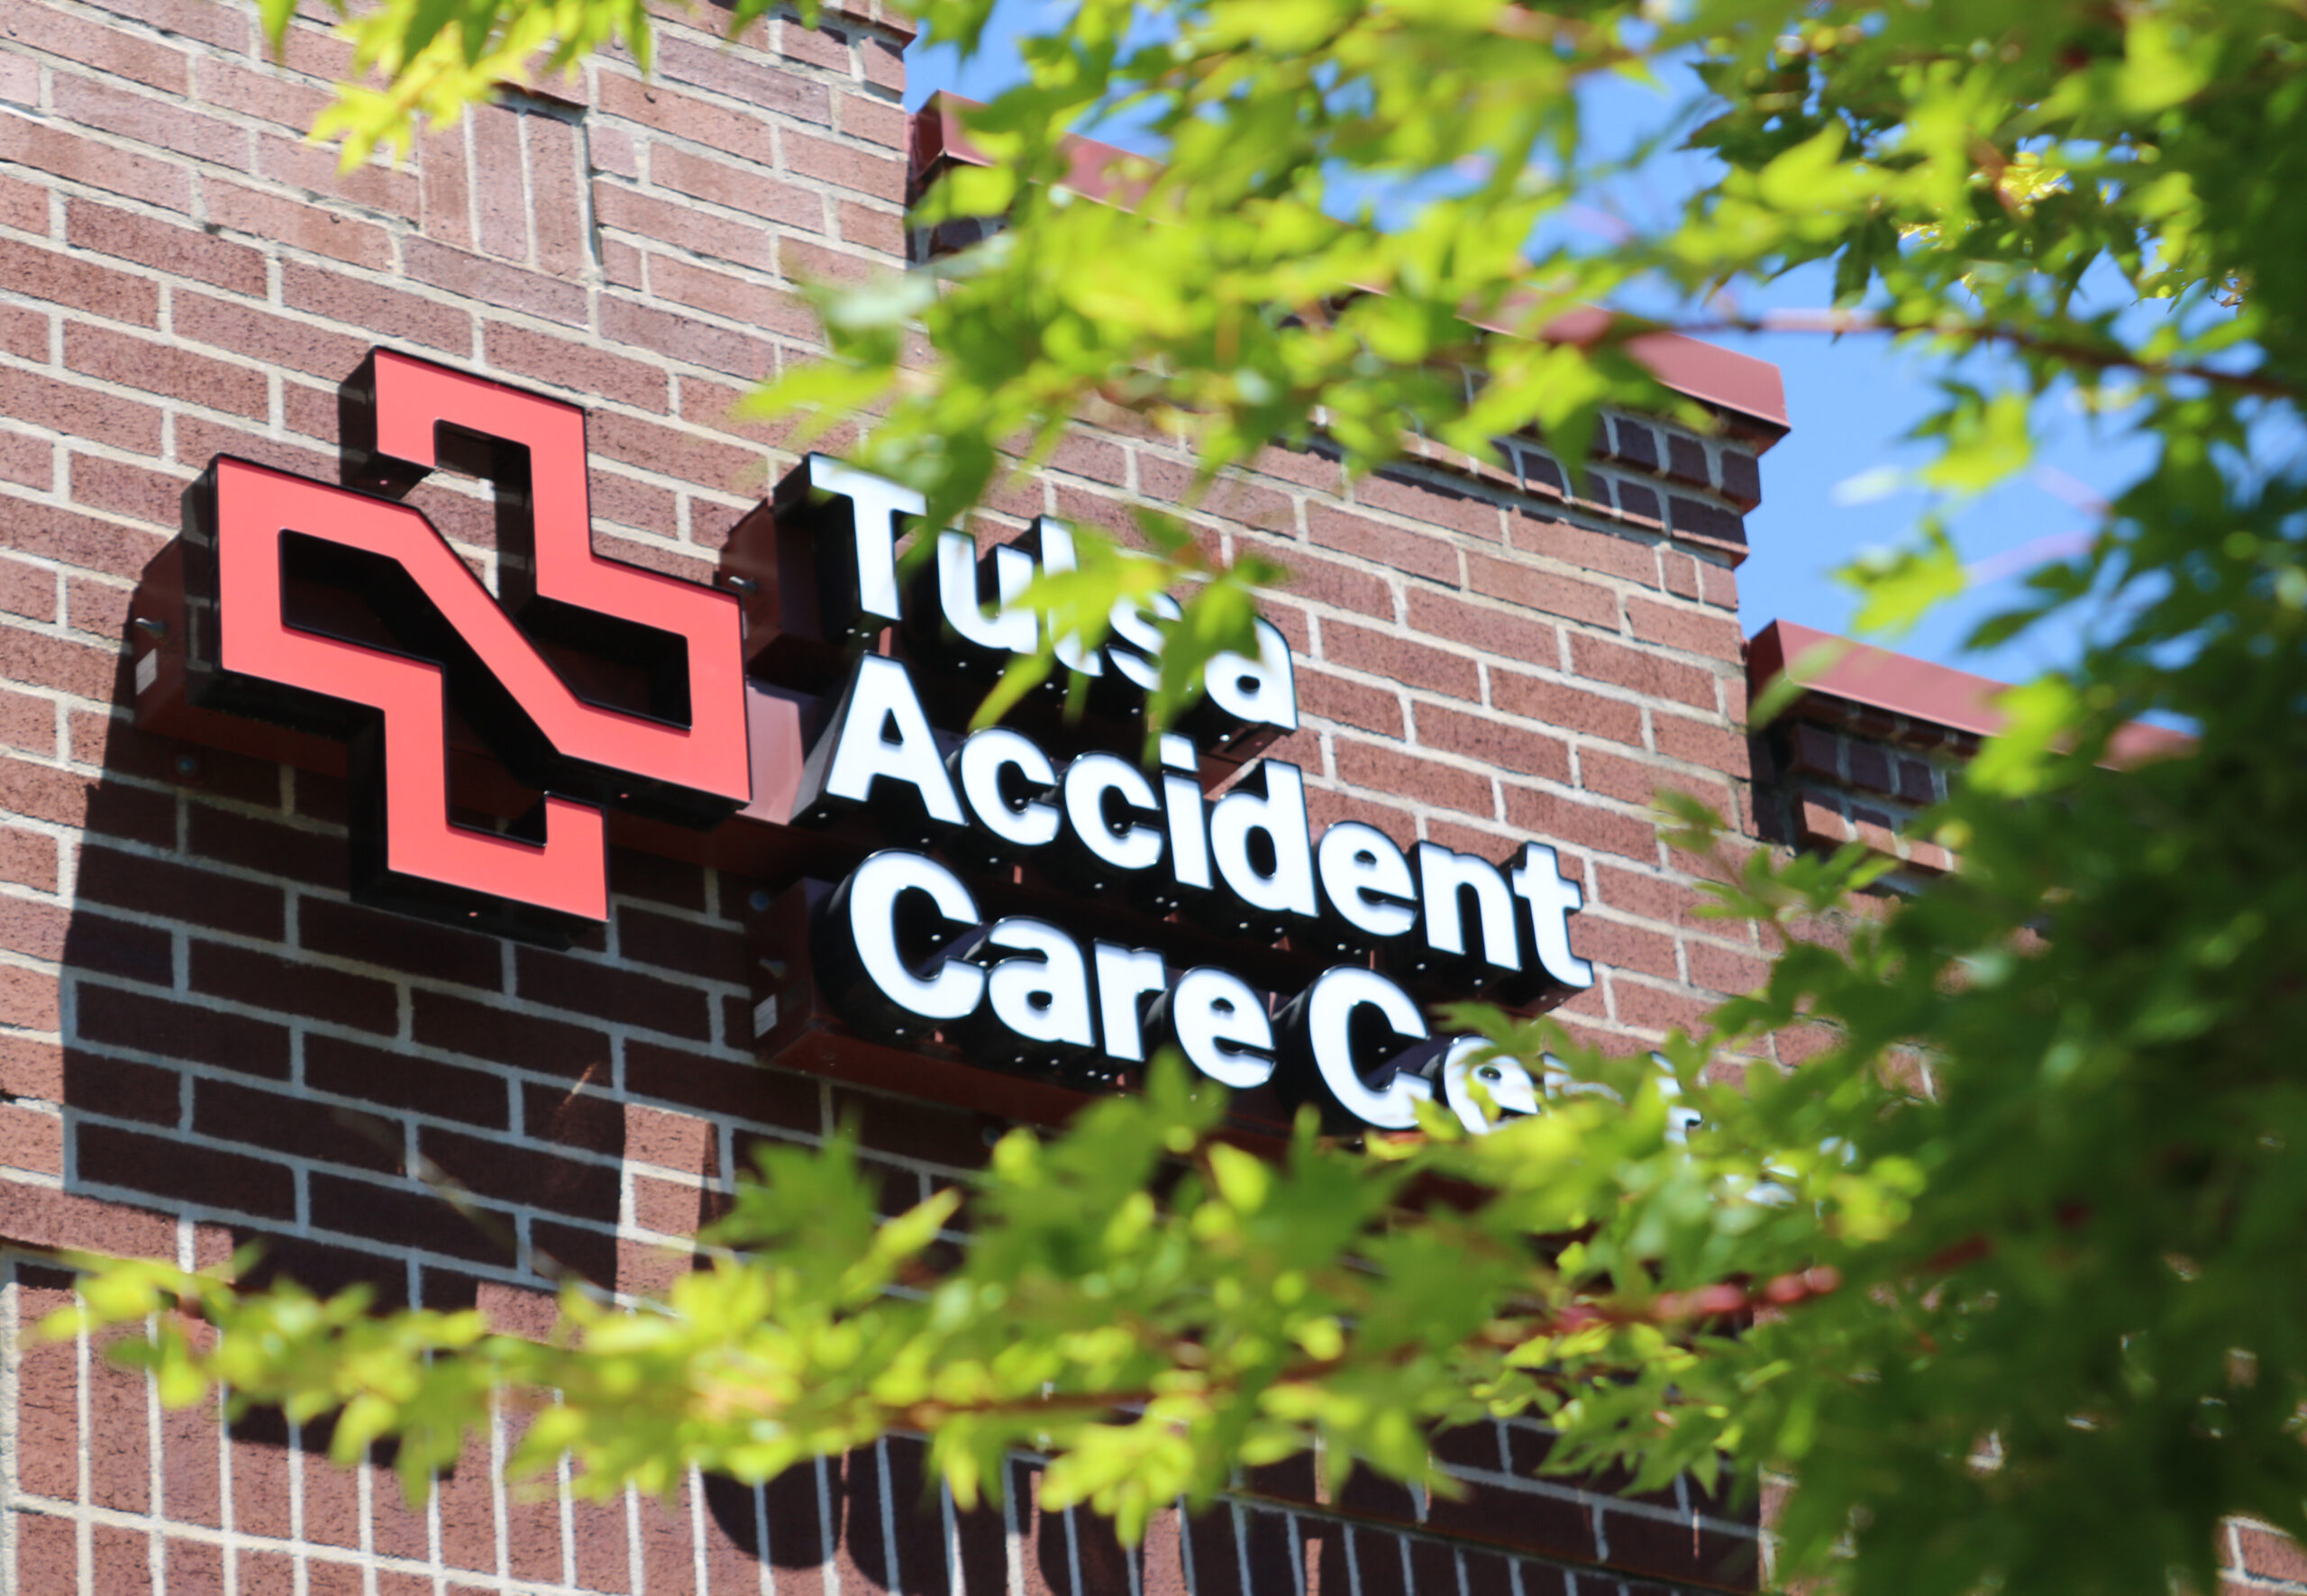 Exterior signage of Tulsa Accident Care Center as seen through tree branches.